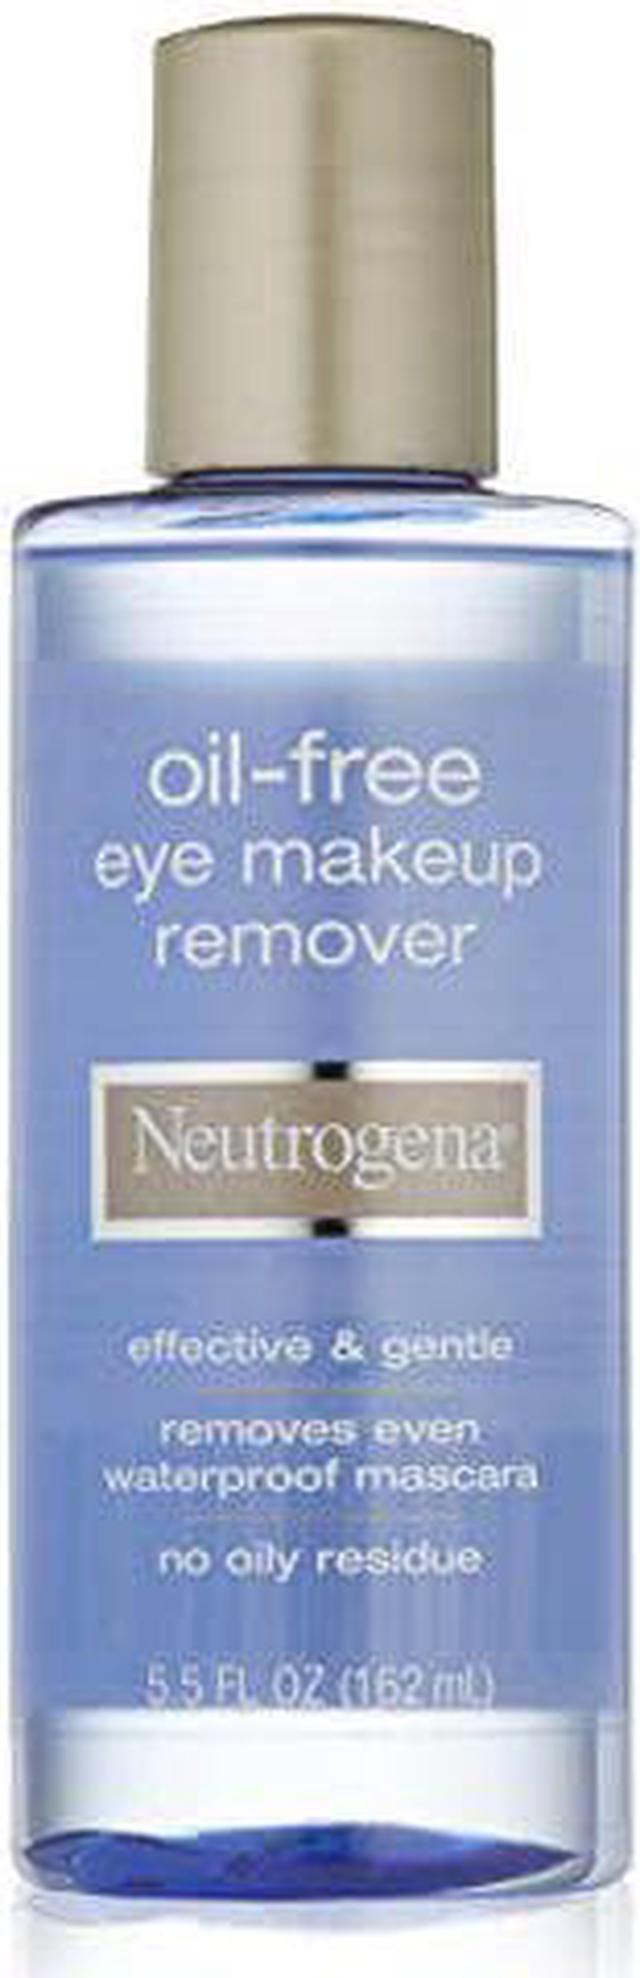 Neutrogena Gentle Oil-Free Eye Makeup Remover & Cleanser for Sensitive Eyes, Non-Greasy Makeup Remover, Removes Waterproof Mascara, Dermatologist & Tested, 5.5 fl. oz ( of 3) Memory Books & Keepsakes